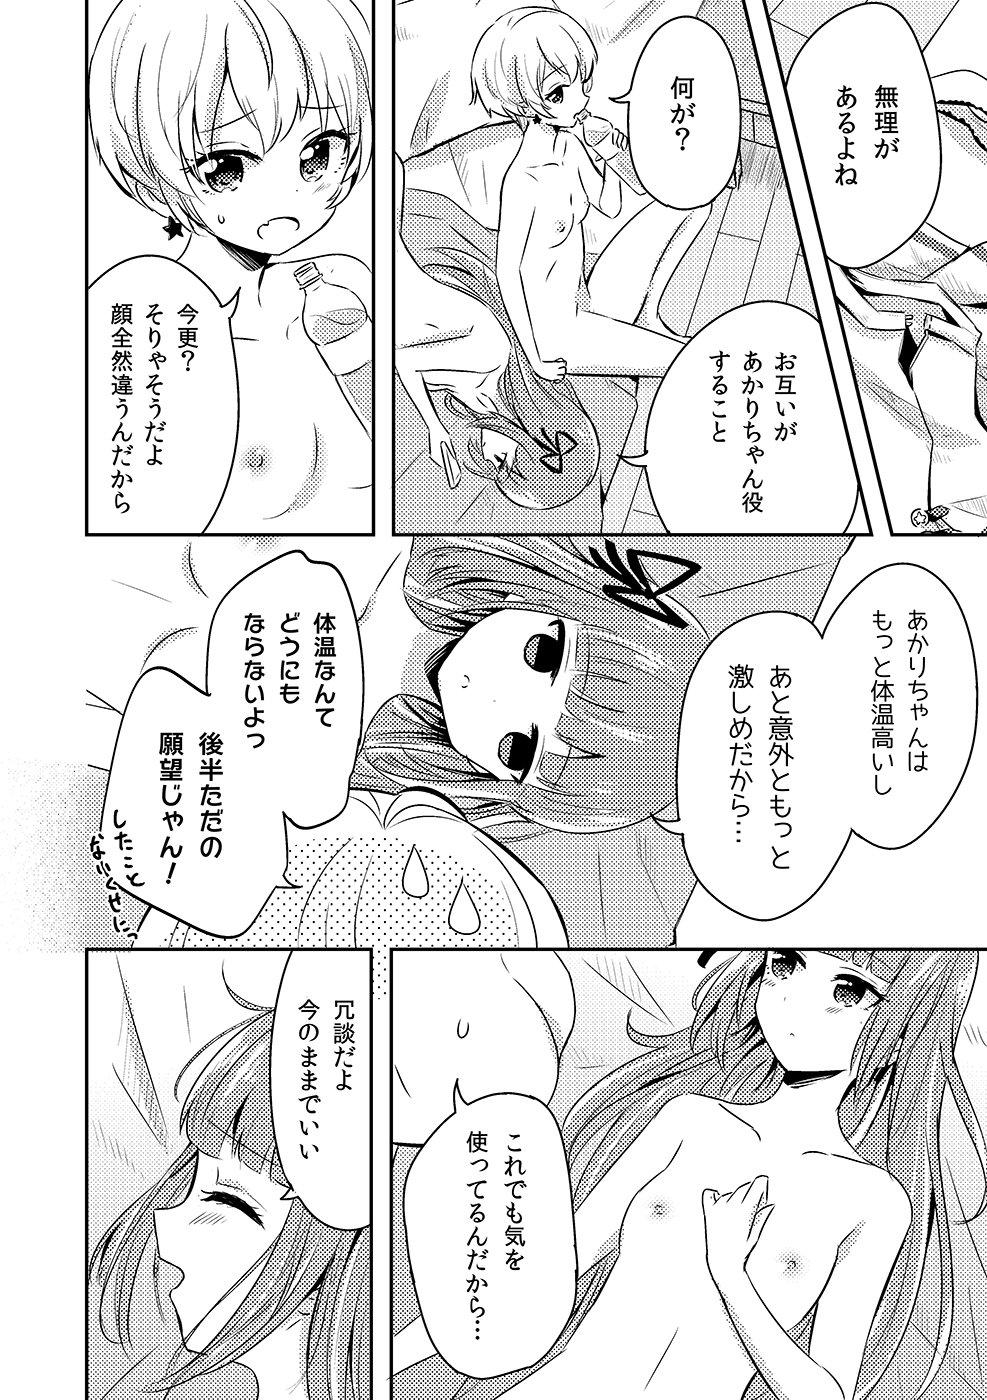 Large Who contributed to loveless sex joint two years ago! Yuusumi manga. - Aikatsu Whores - Page 2